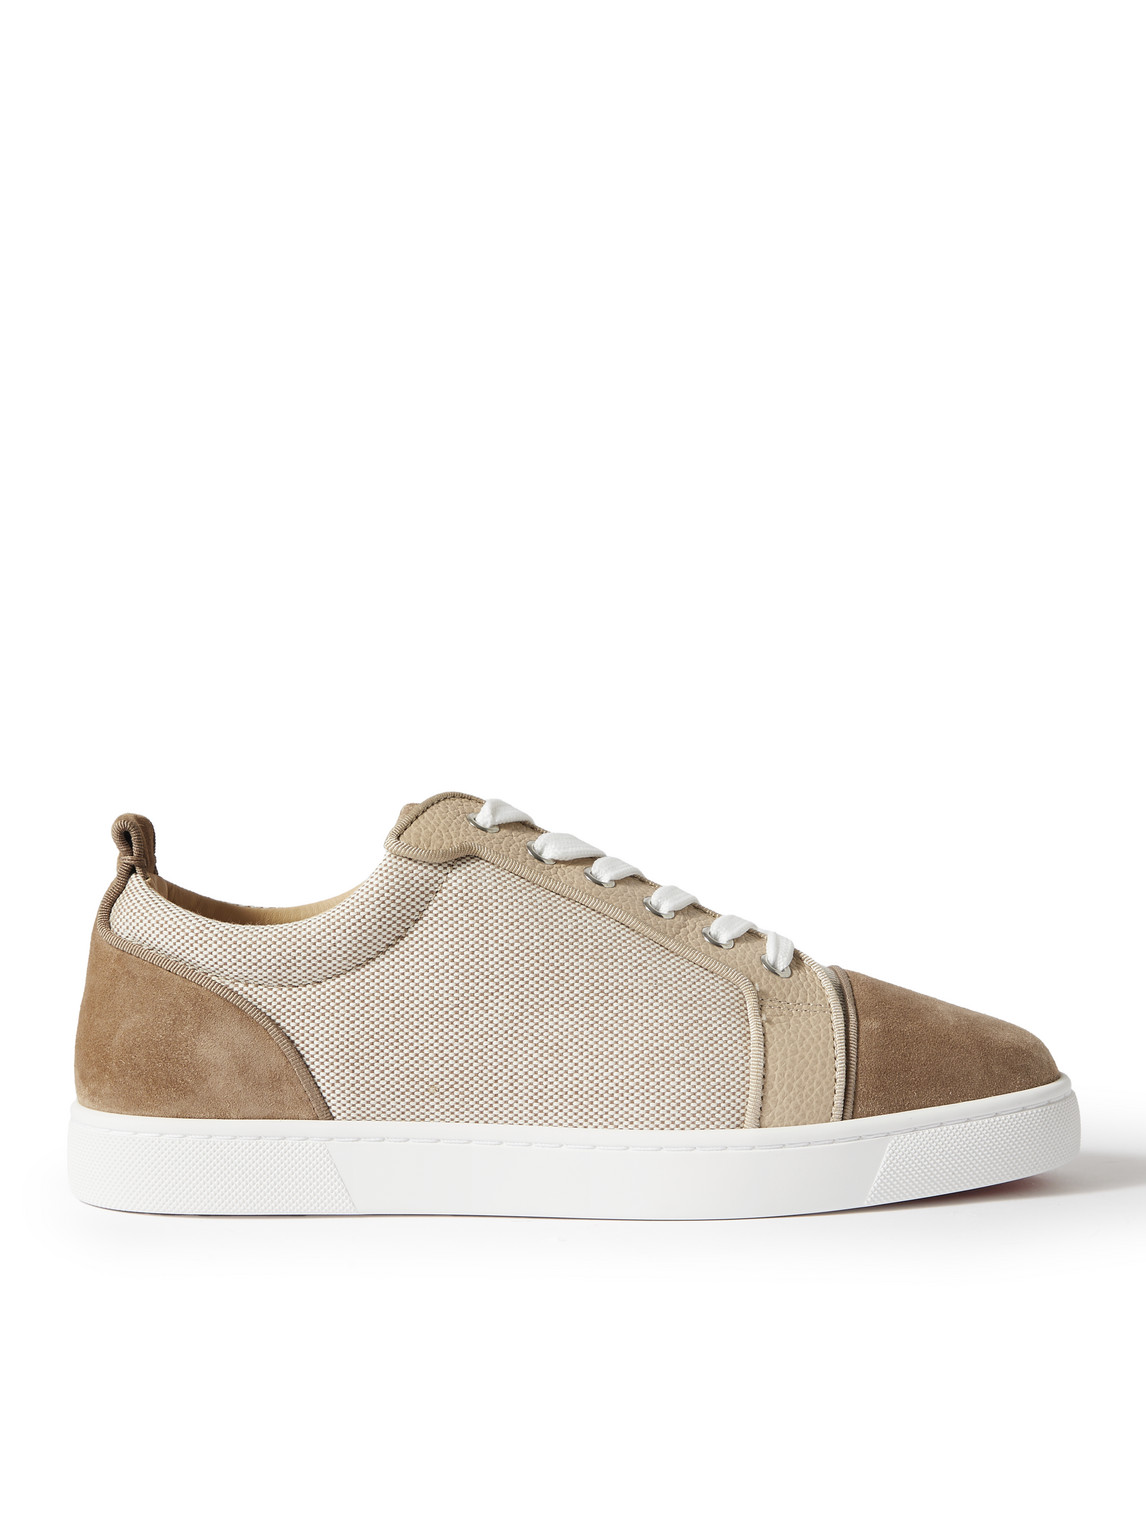 Christian Louboutin Louis Junior Linen, Leather And Suede Leather Sneakers In Brown